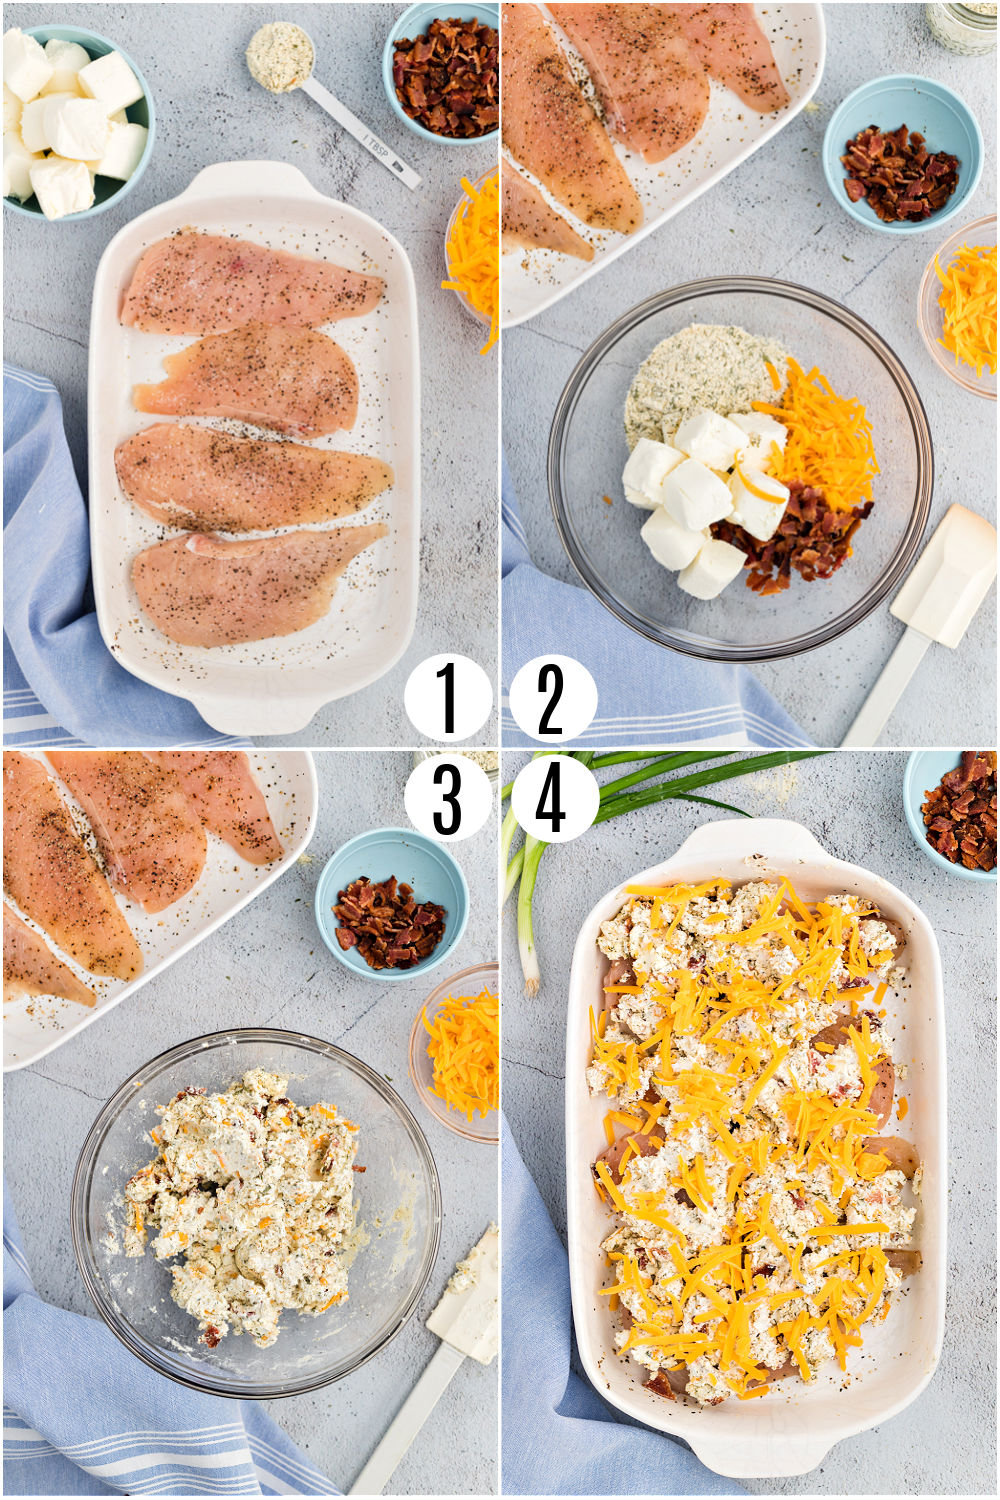 Step by step photos showing how to assemble crack chicken casserole.